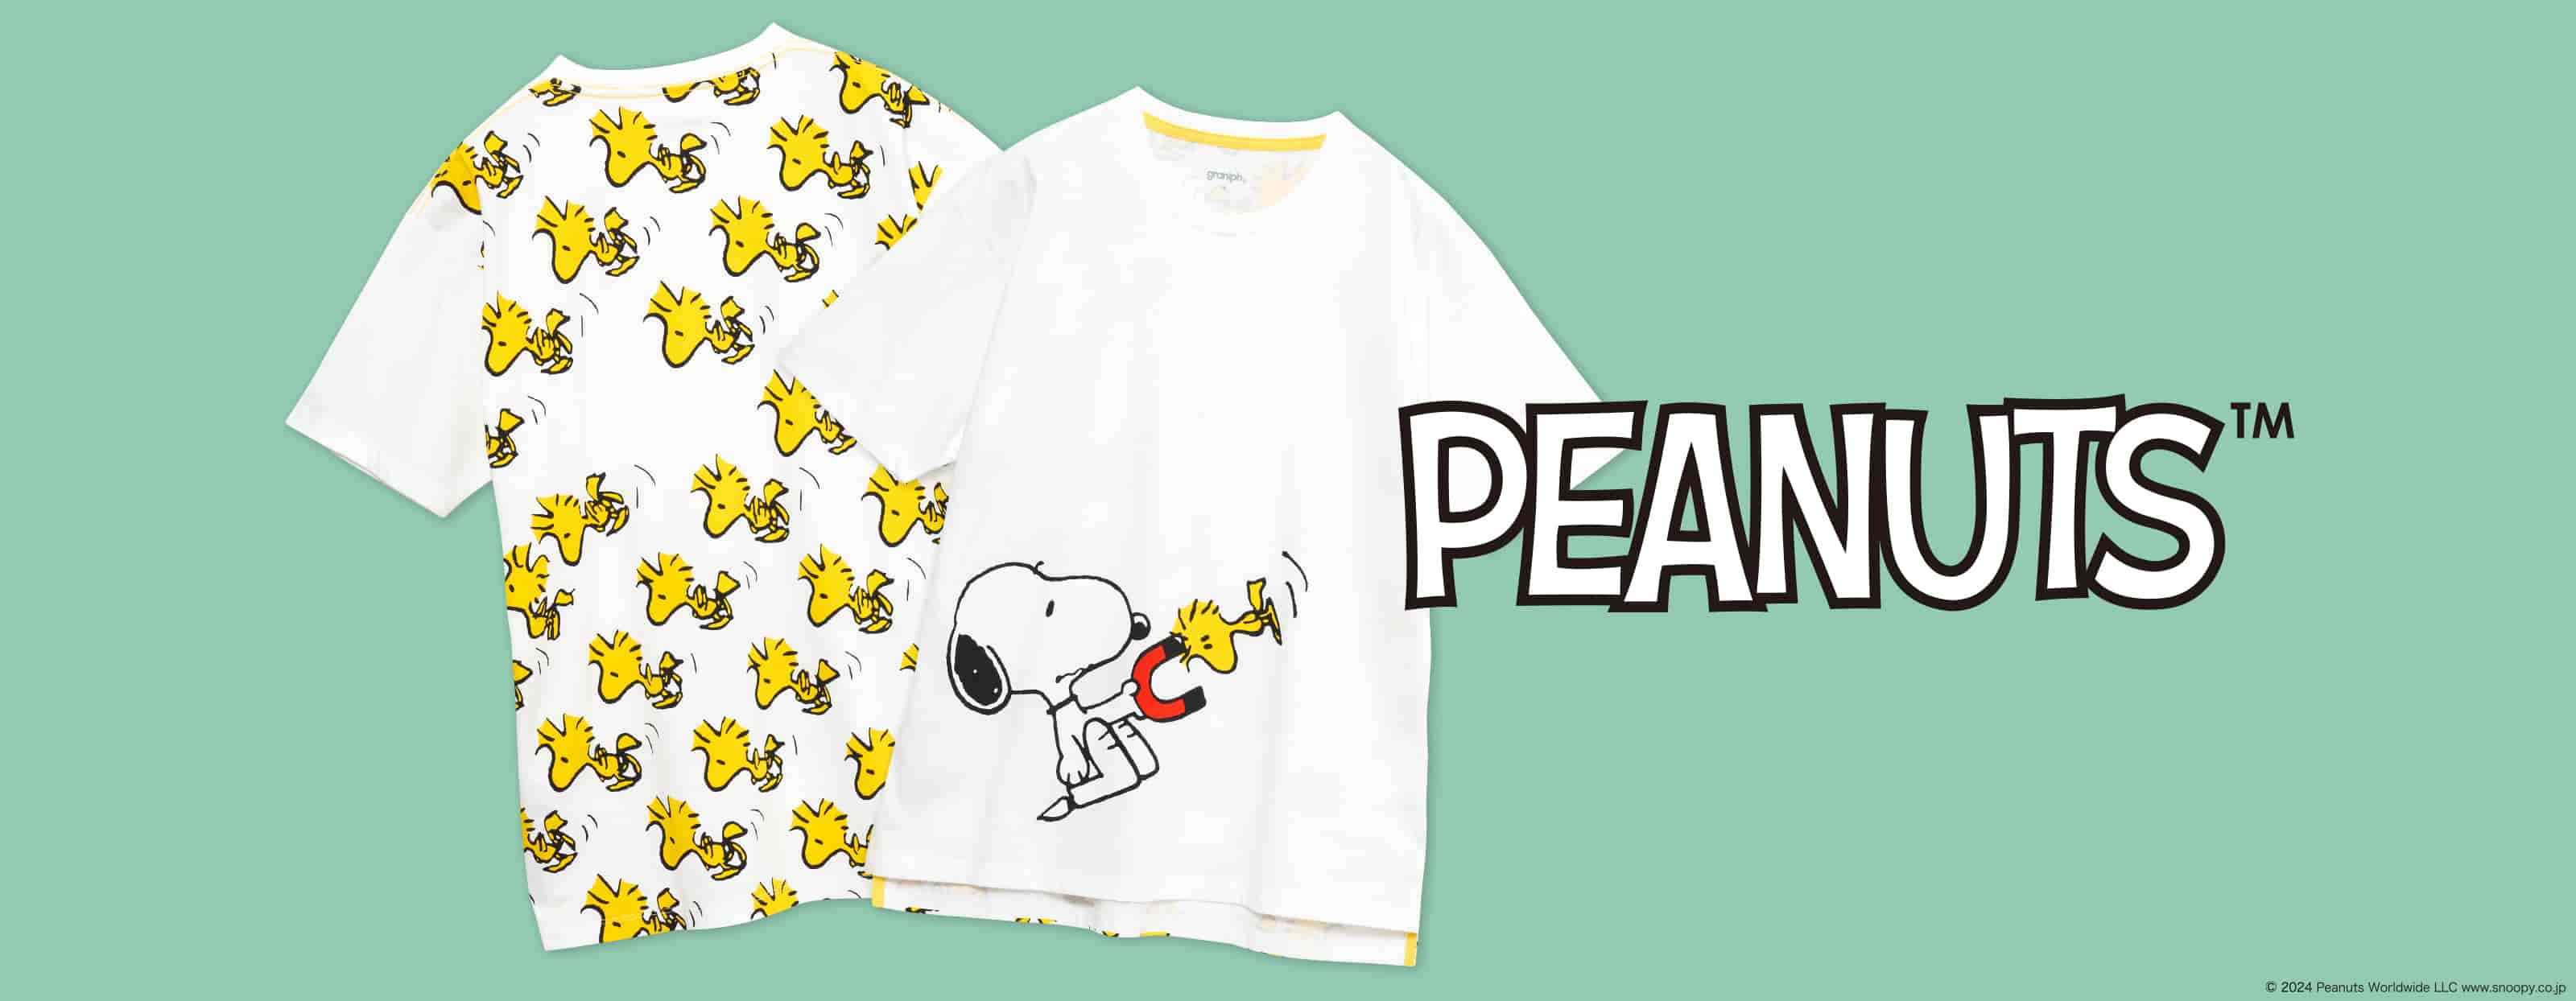 We are proud to present a collaboration collection with the legendary American cartoonist, Charles M. Schulz and his beloved creation, Peanuts. Since its first appearance in 1950, the comic strips and its characters as Charlie Brown, Snoopy, Woodstock and many others have been loved all over the world.[ssorder:-20240205]